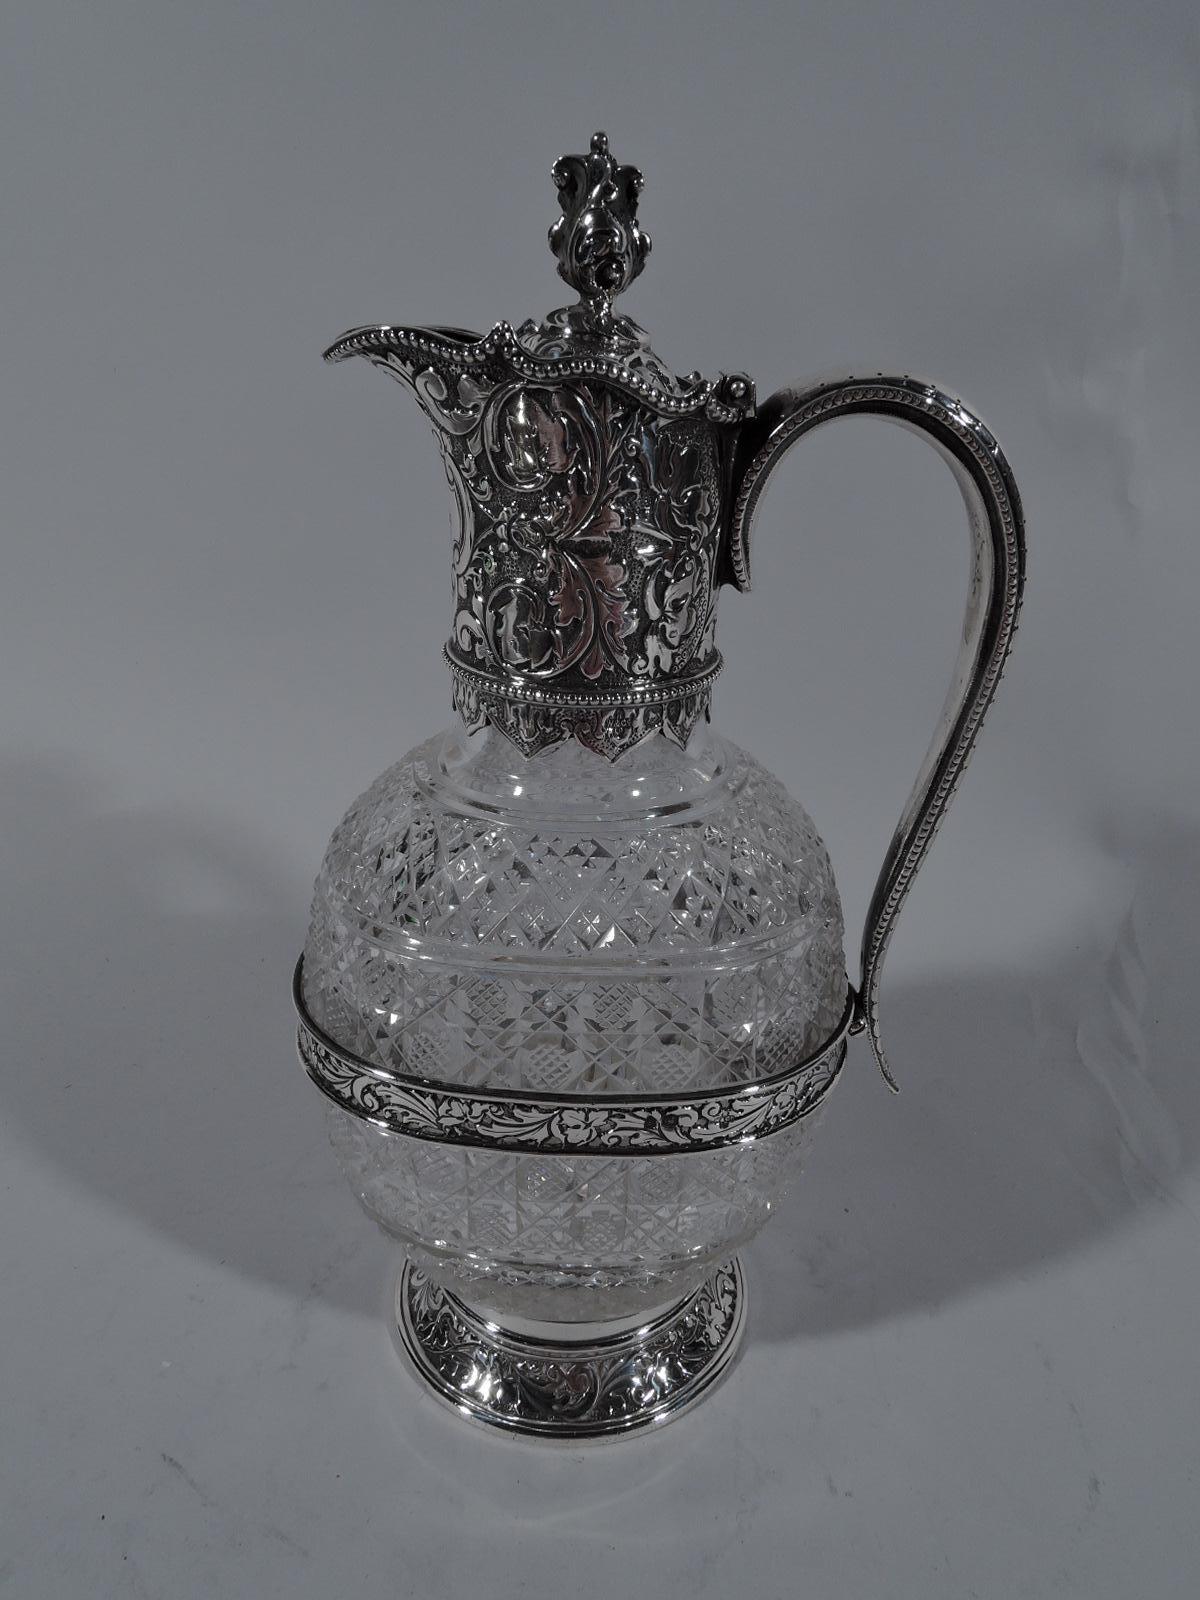 Victorian brilliant-cut decanter with sterling silver mounts. Made by Horace Woodward & Co., Ltd in London in 1894. Round and flat body with dense diaper ornament. Cylindrical neck in sterling silver collar with helmet mouth. Cover hinged with